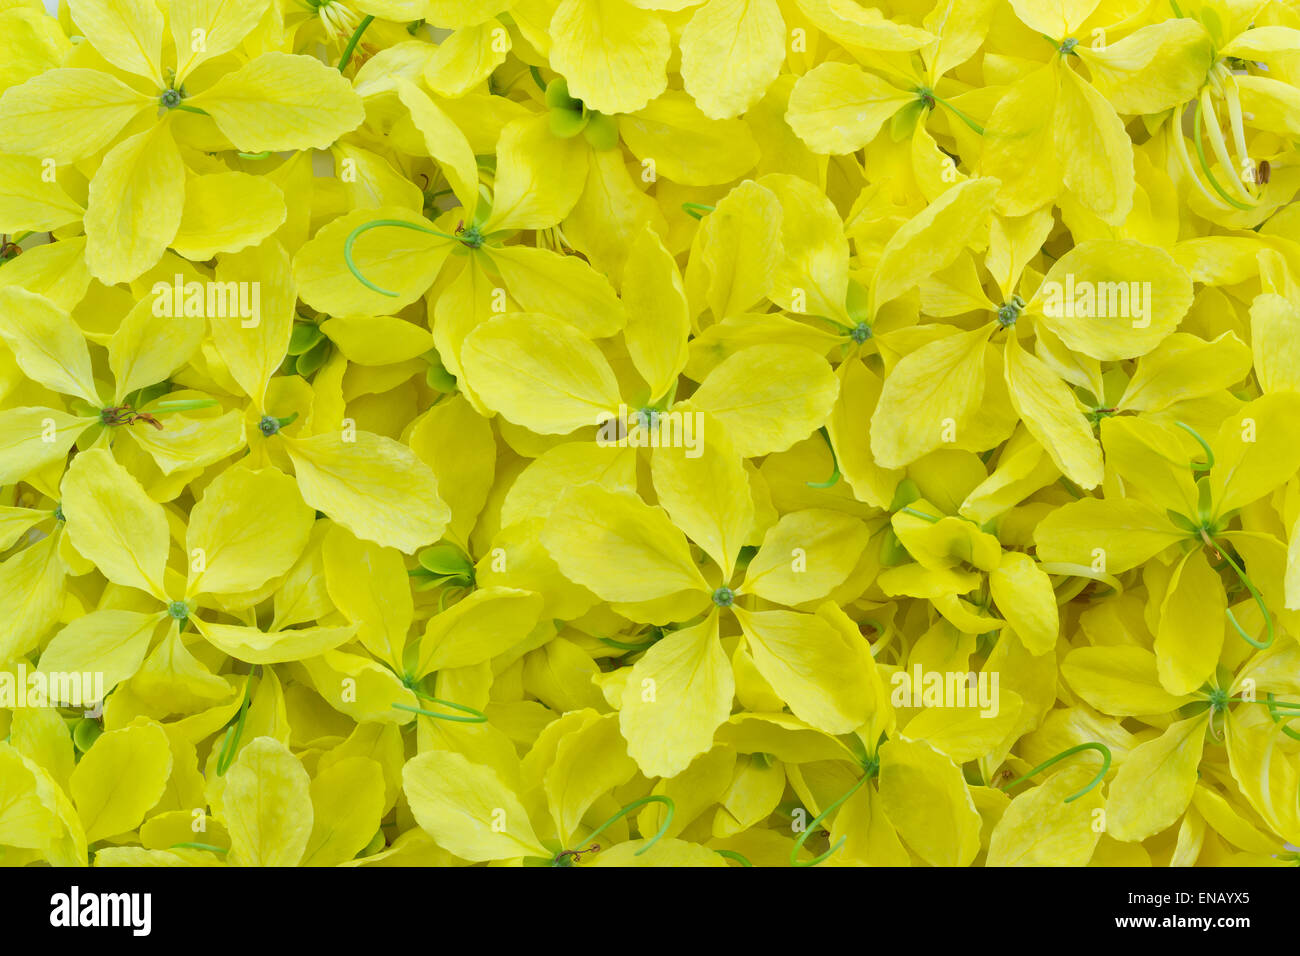 Cassia fistula known as Golden Shower flowers, yellow flowers background Stock Photo